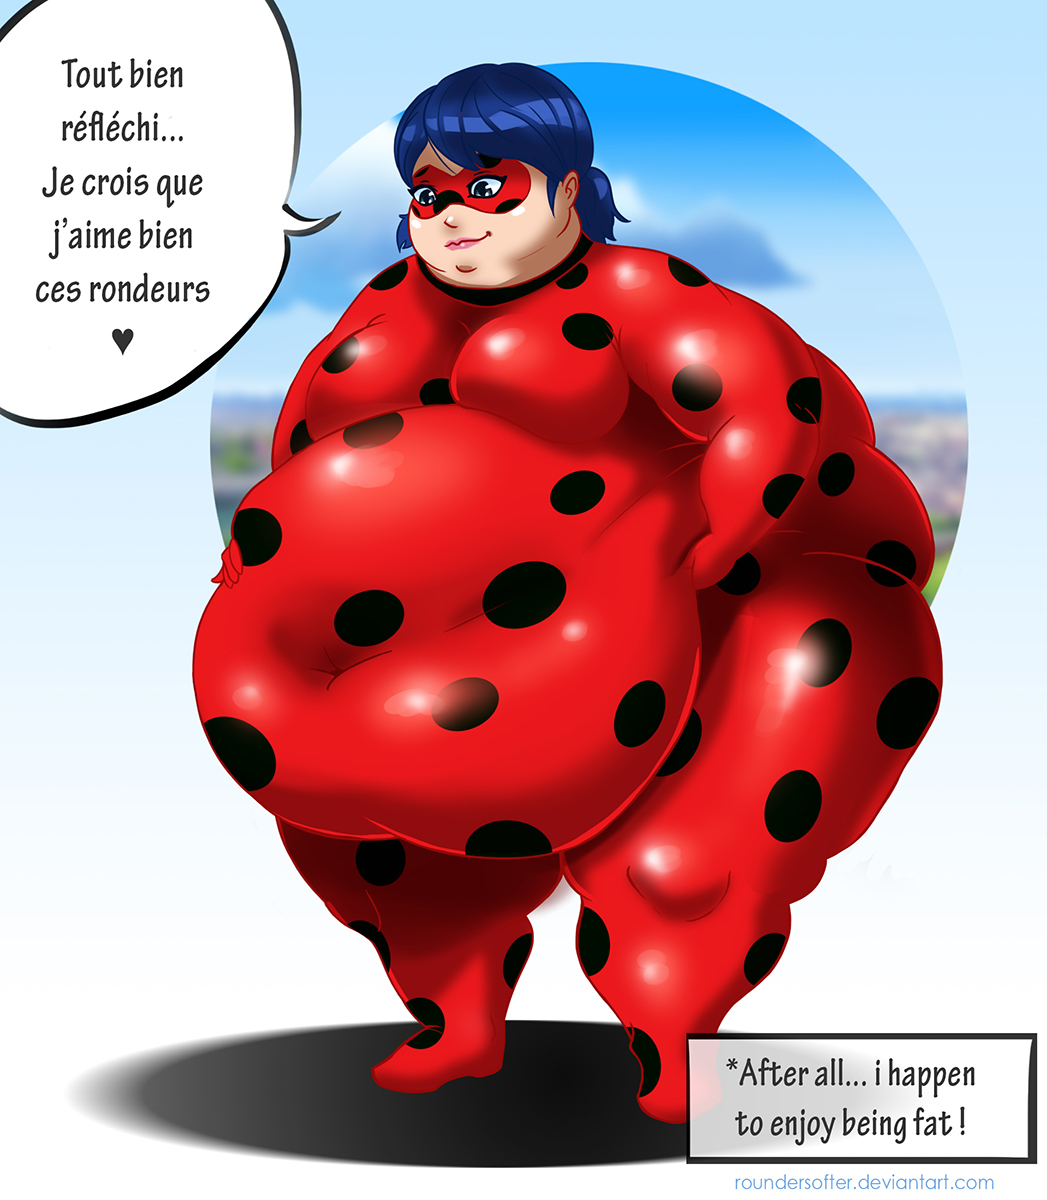 comm miraculous_ladybug_sequence_part_3_by_roundersofter-dbms0pg.jpg.